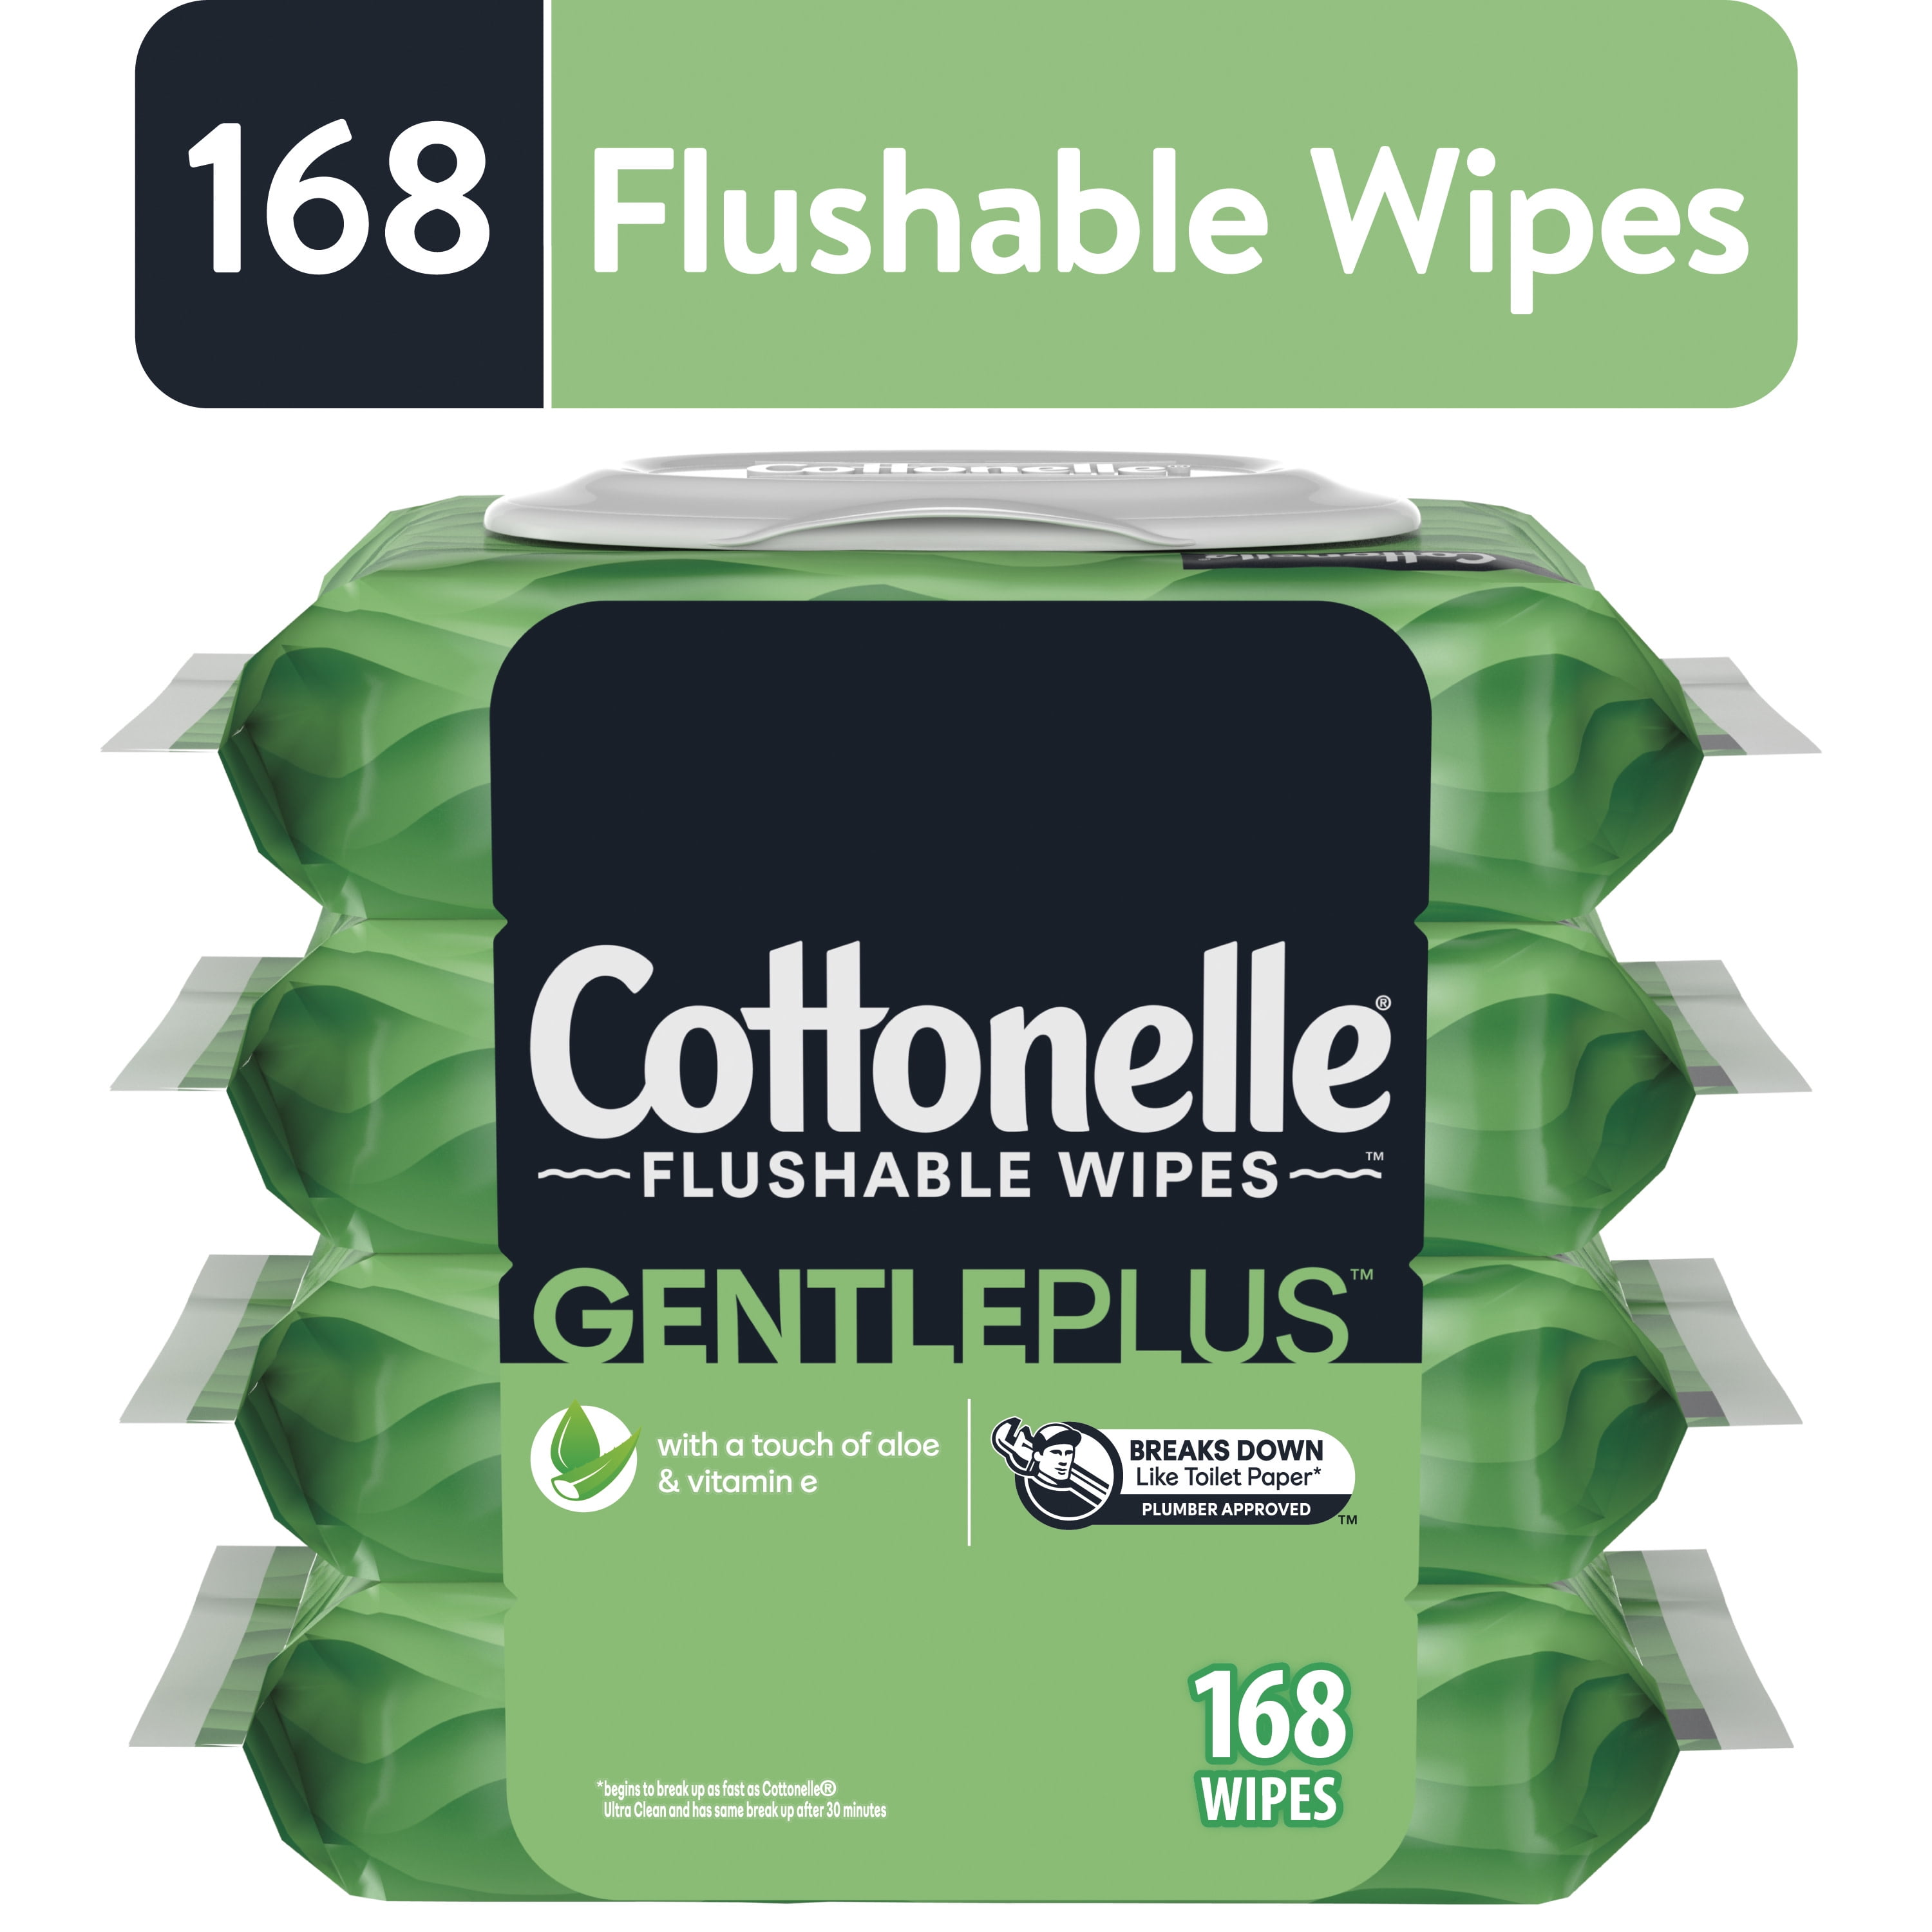 Cottonelle GentlePlus, 4 Flip-Top Packs, 42 Wipes per Pack (168 Total Flushable Wipes)